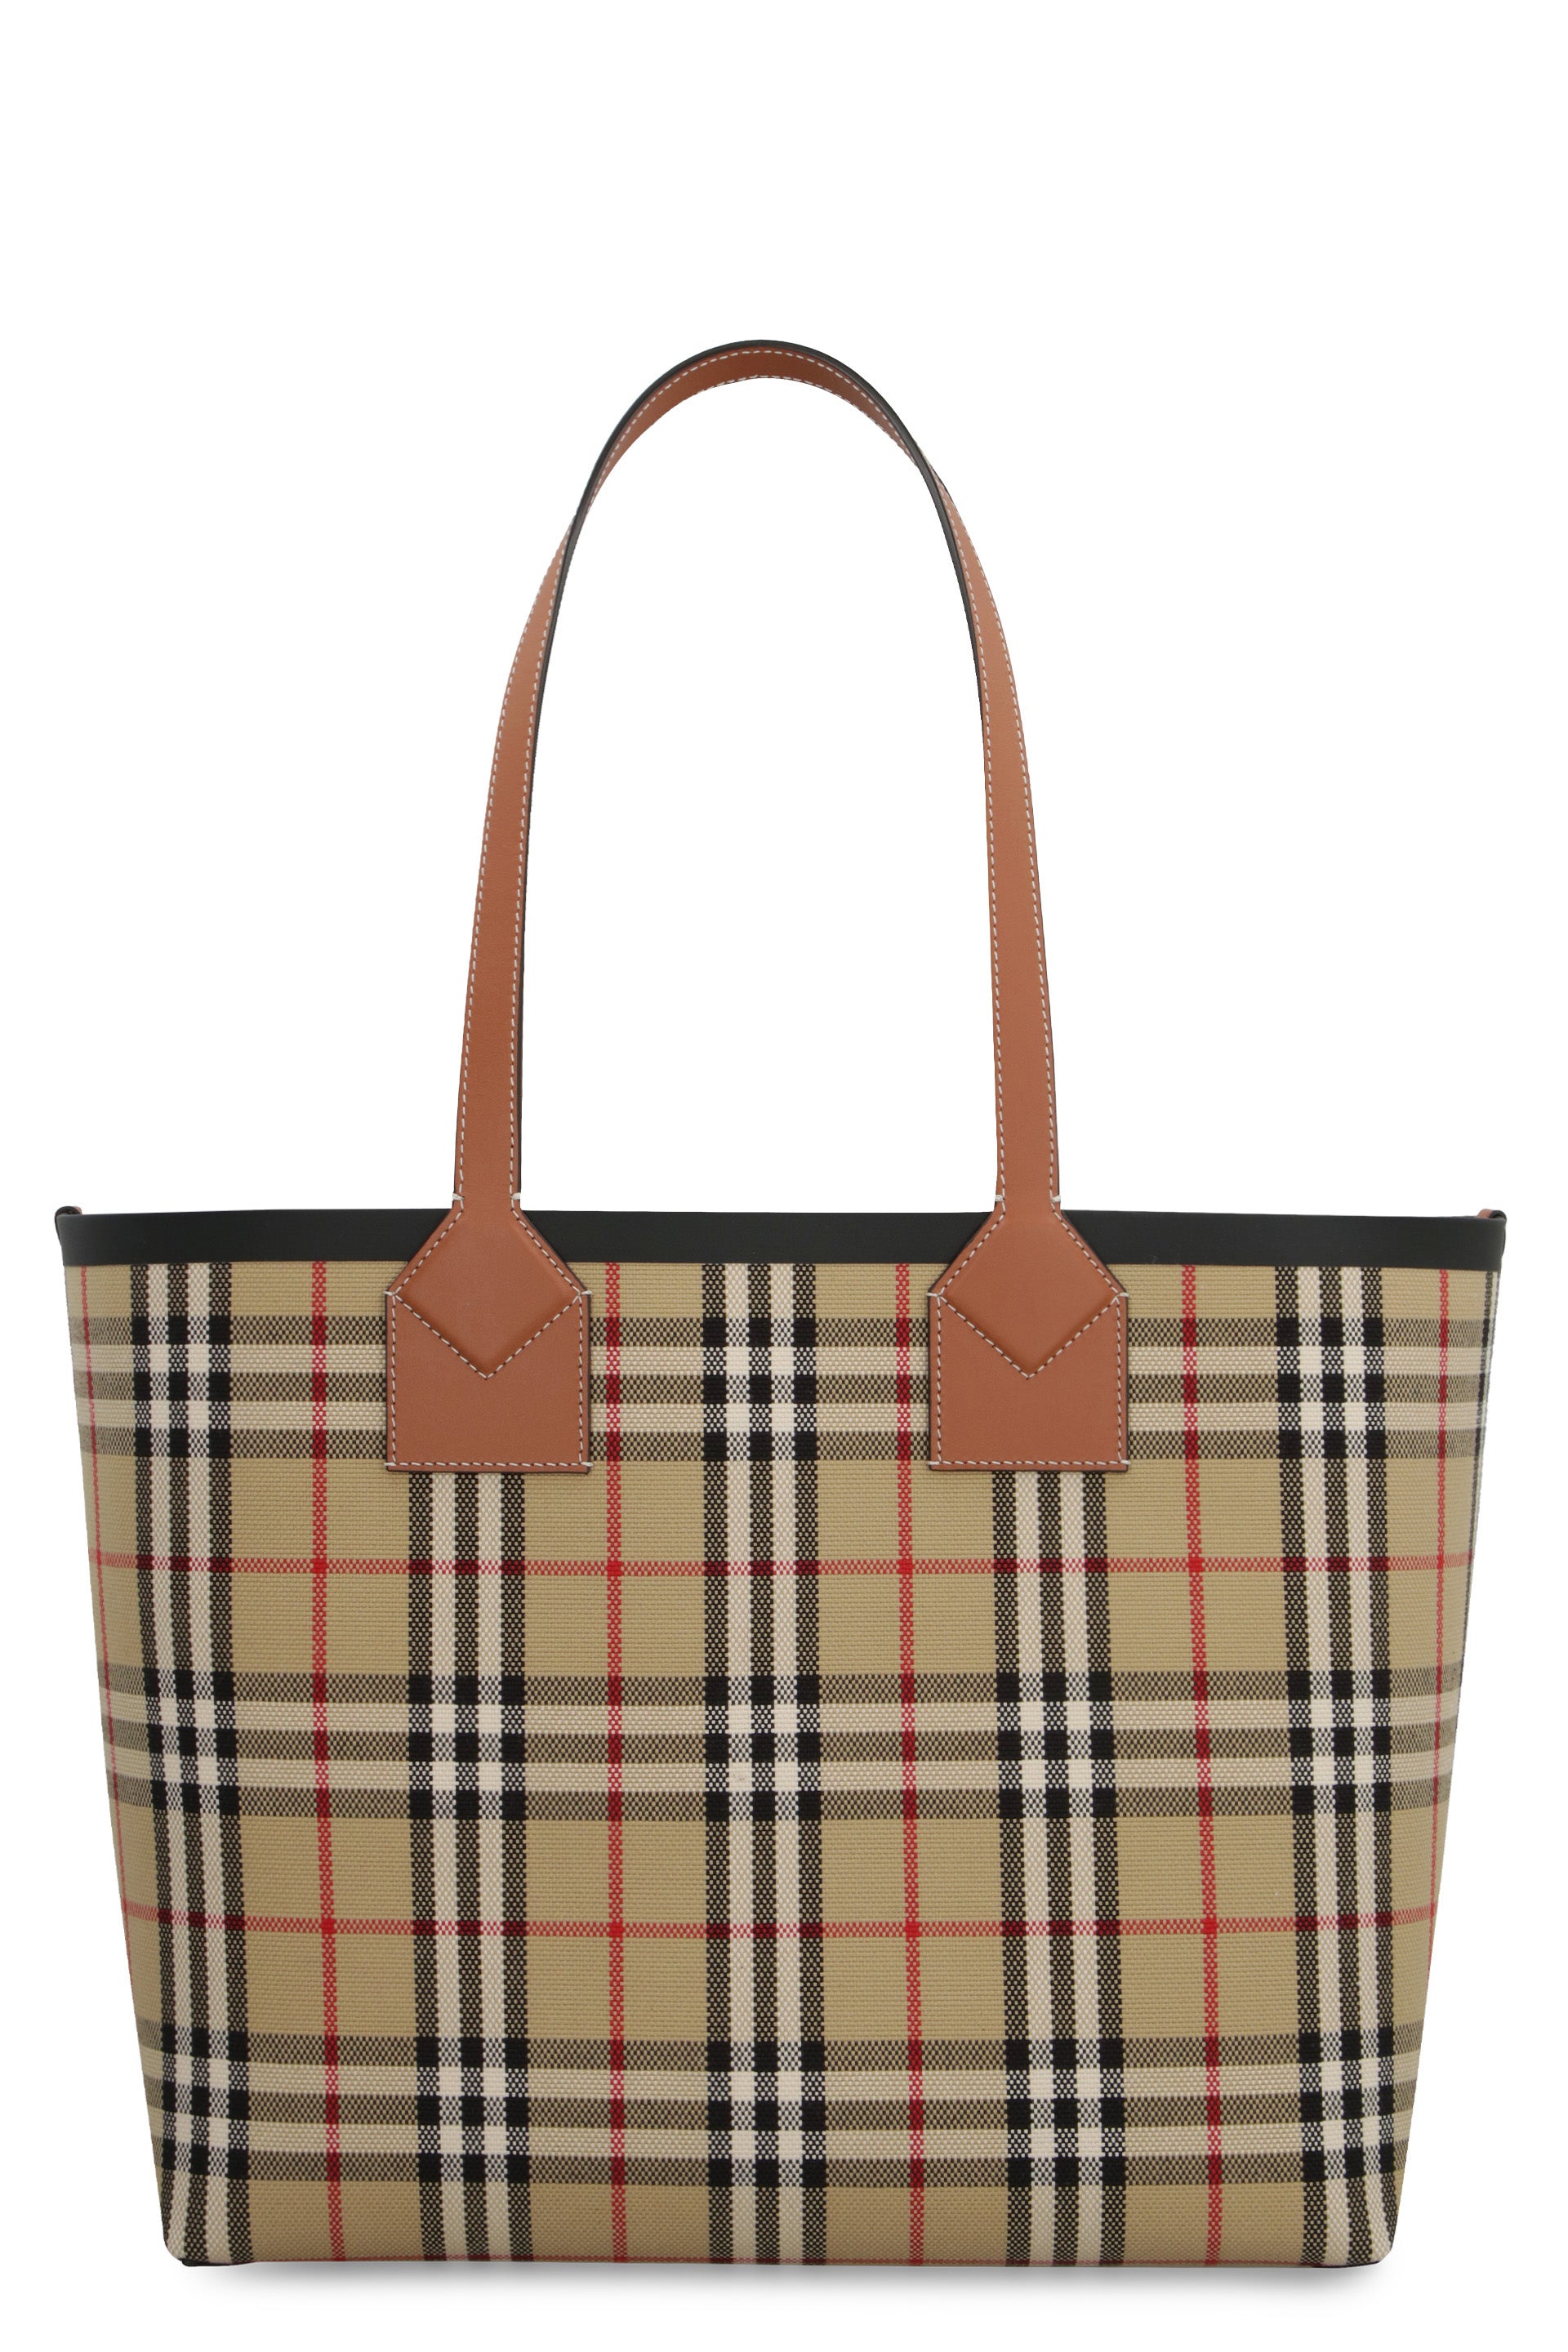 Shop Burberry Sophisticated London Check-pattern Tote Handbag For Women In Brown